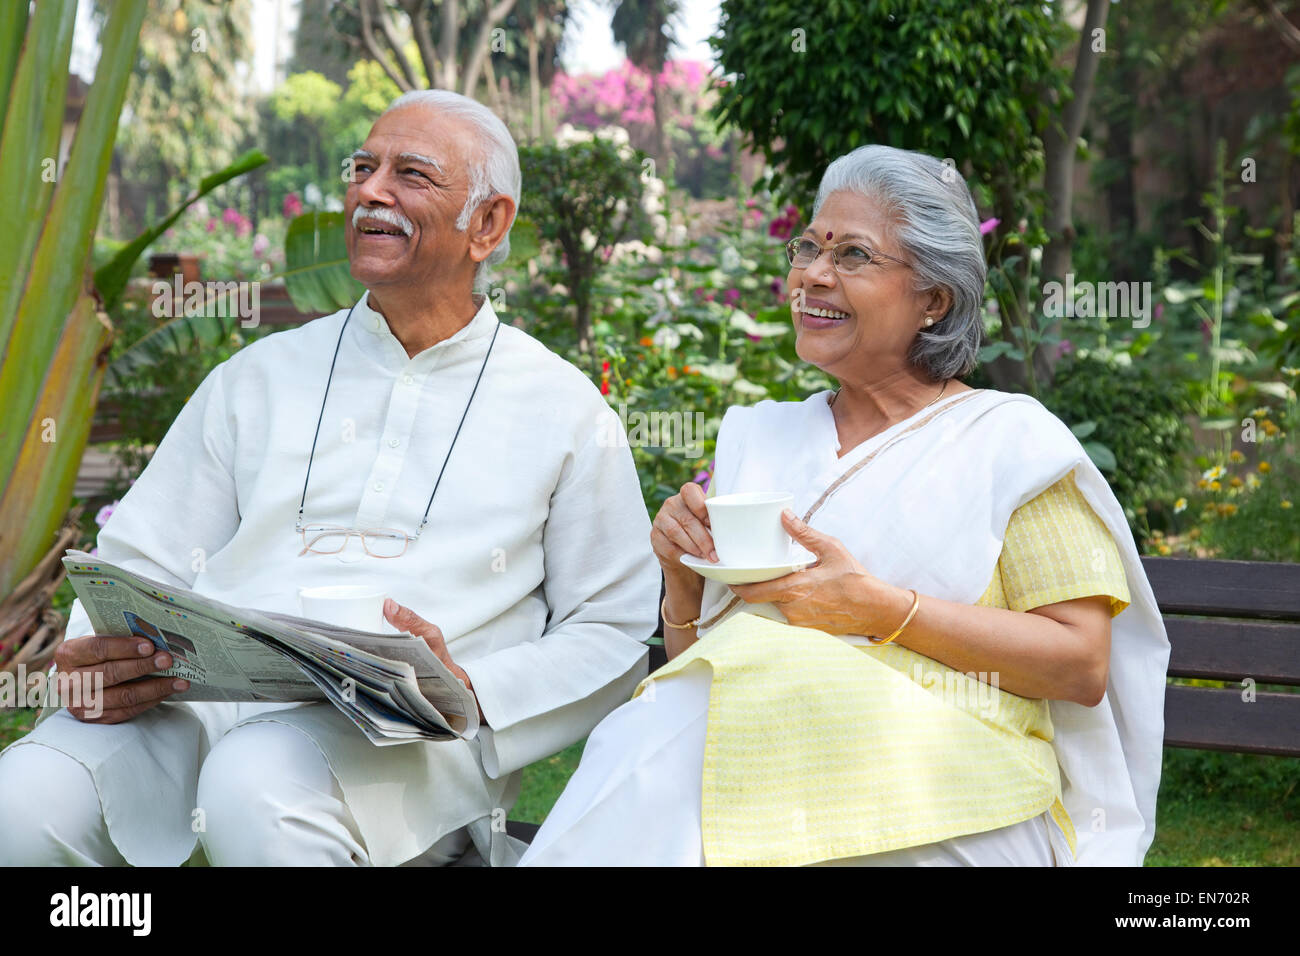 Old couple looking at something Stock Photo